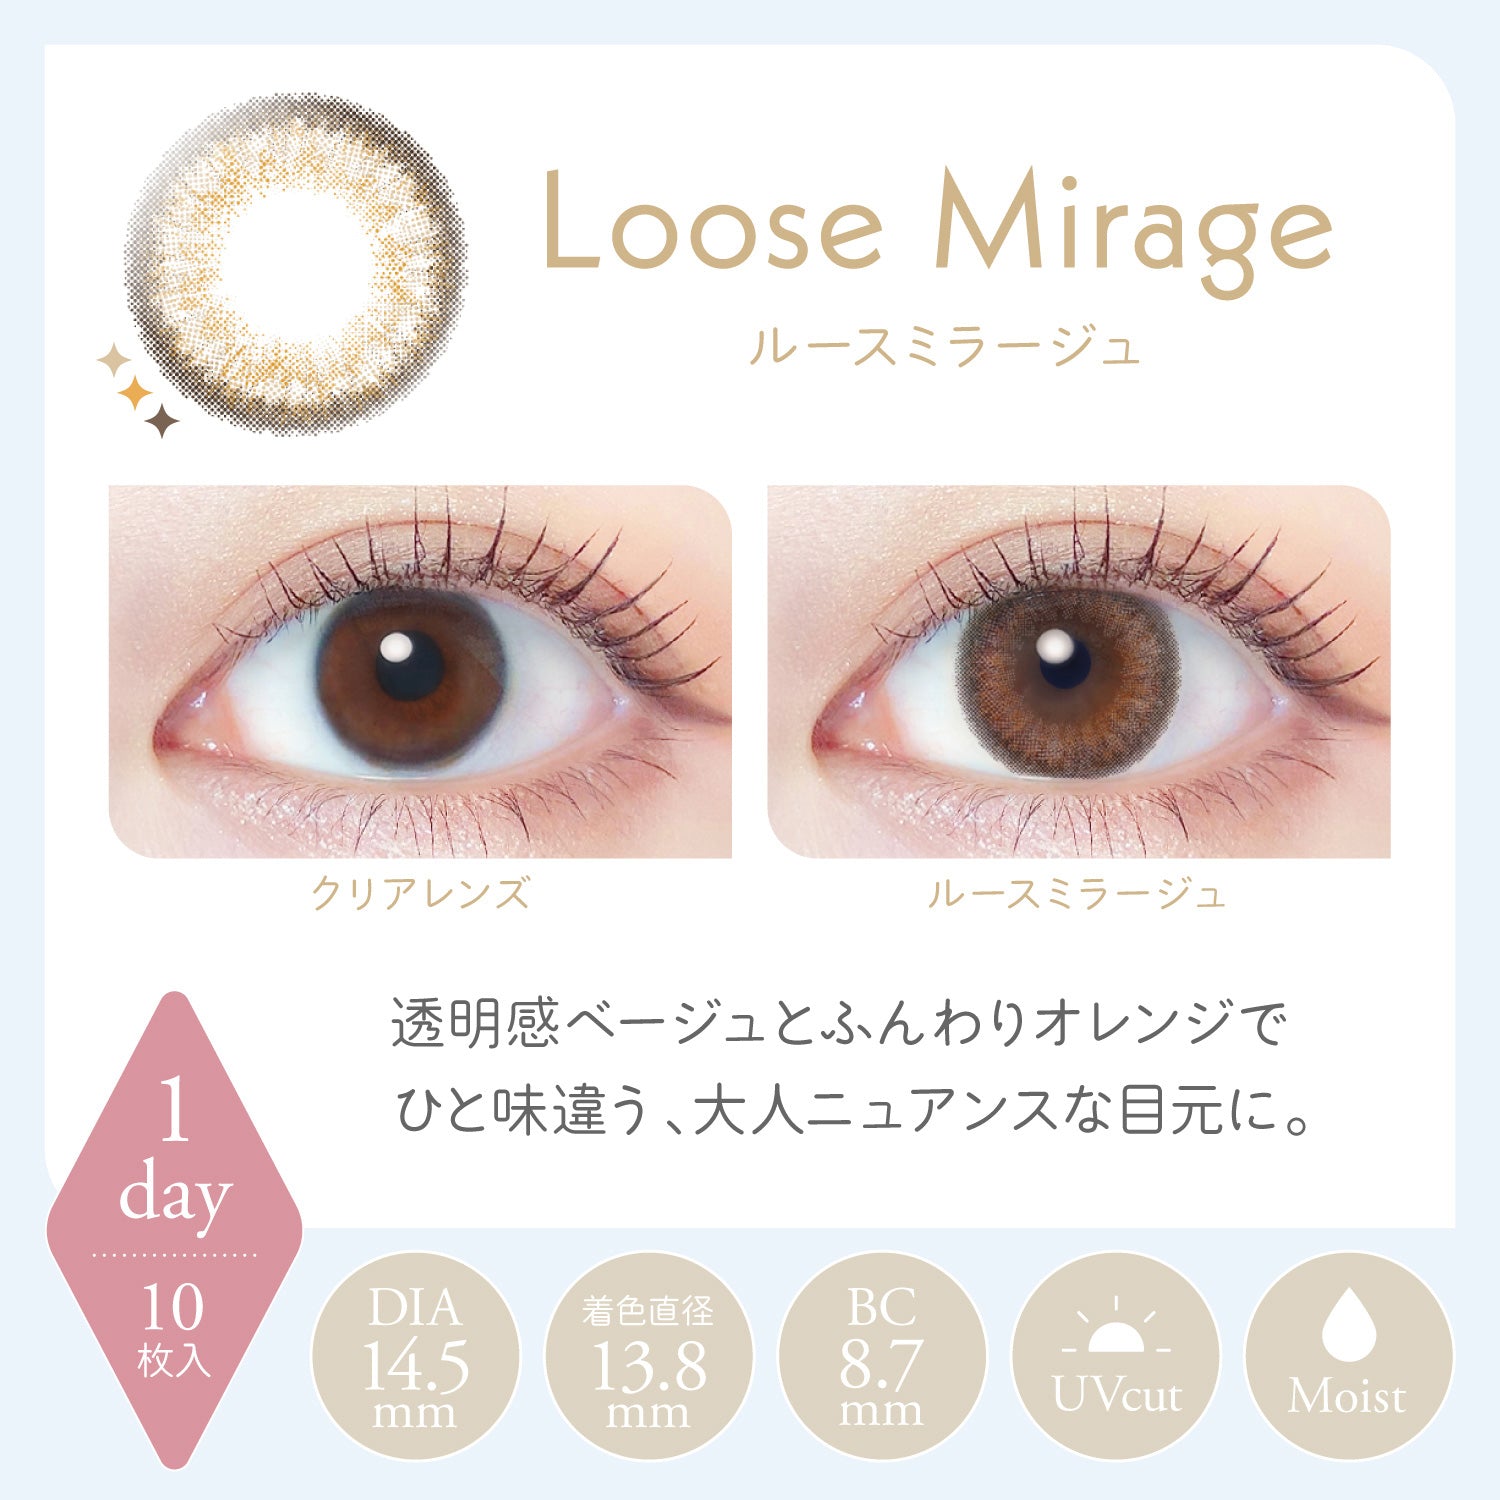 Loose Mirage | 1day